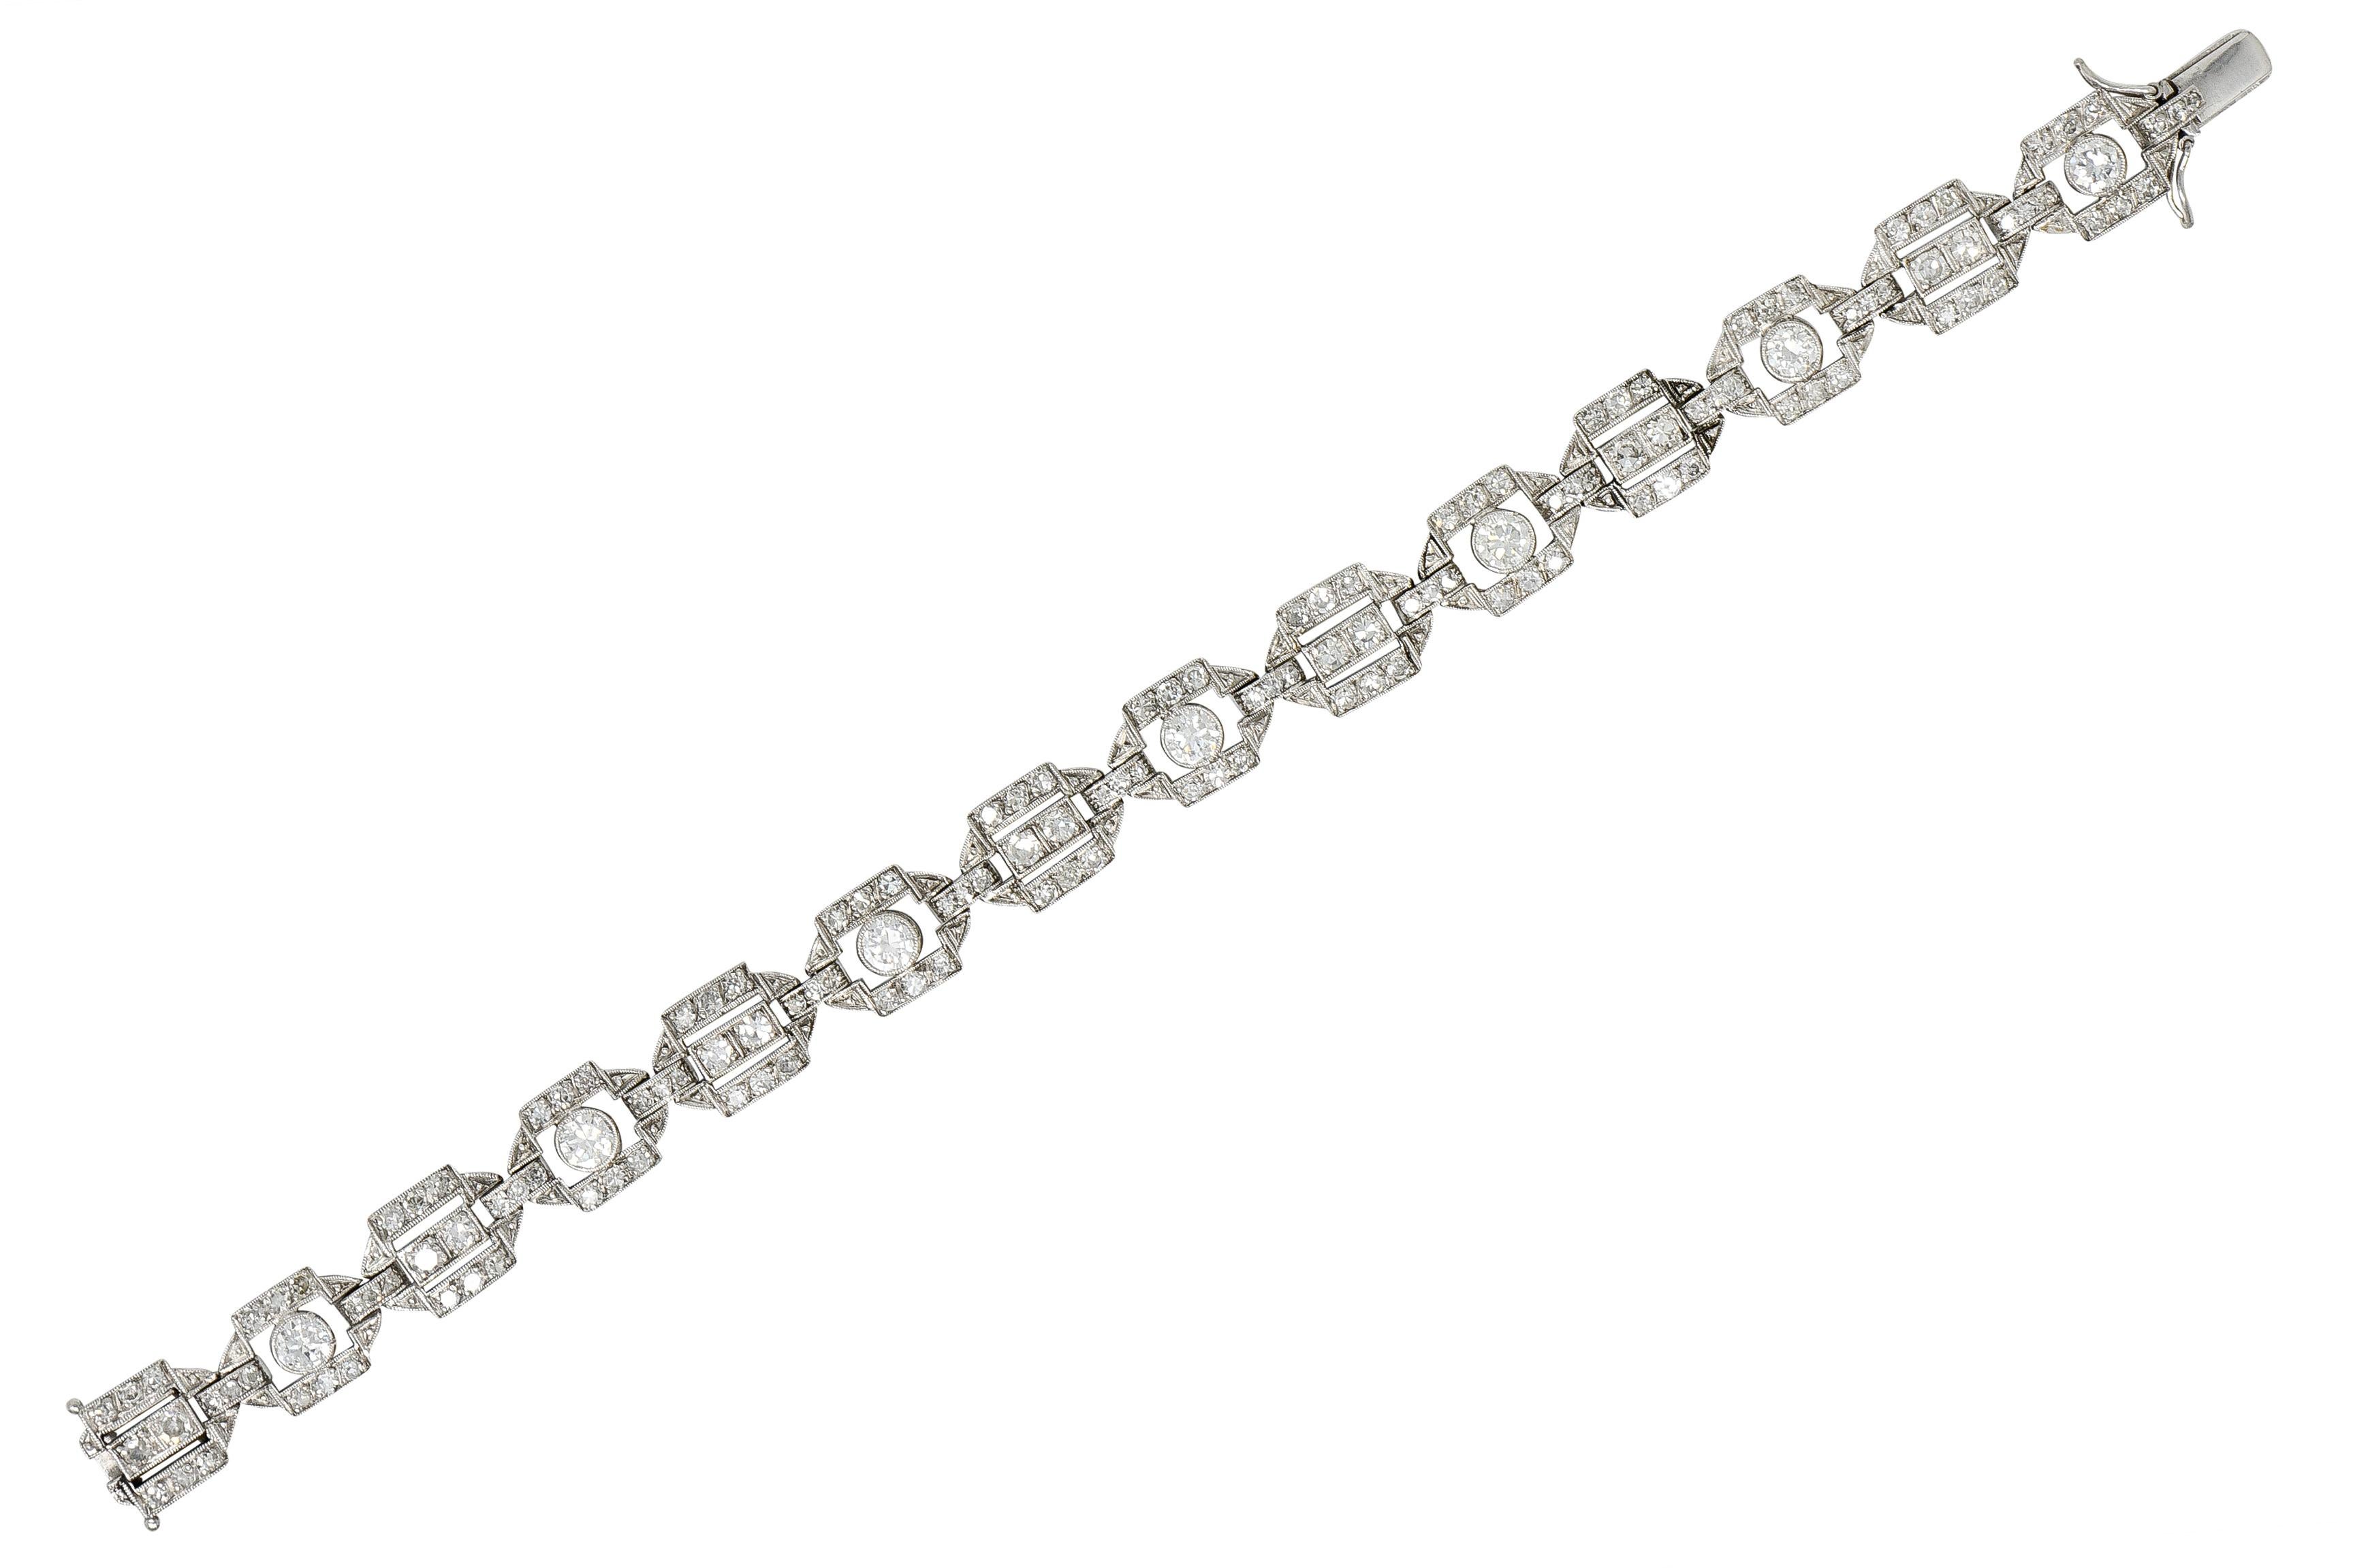 Comprised of bar and pierced geometric links with old European cut diamonds bezel set in alternating links
Weighing approximately 1.61 carats total G color with VS1 clarity
With additional single-cut diamonds bead set throughout  
Weighing